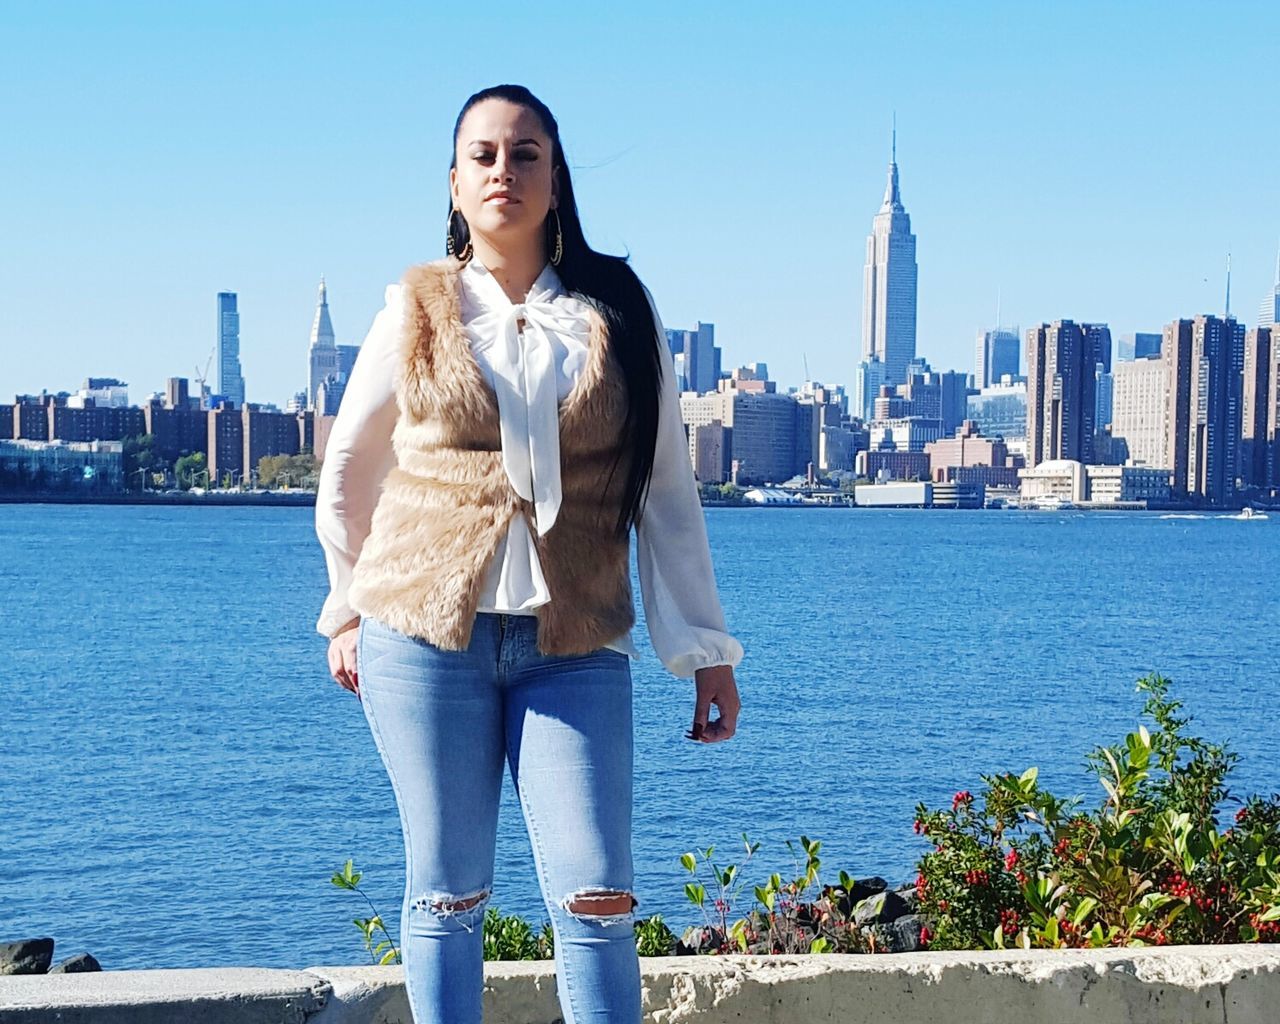 Young woman standing by east river against cityscape